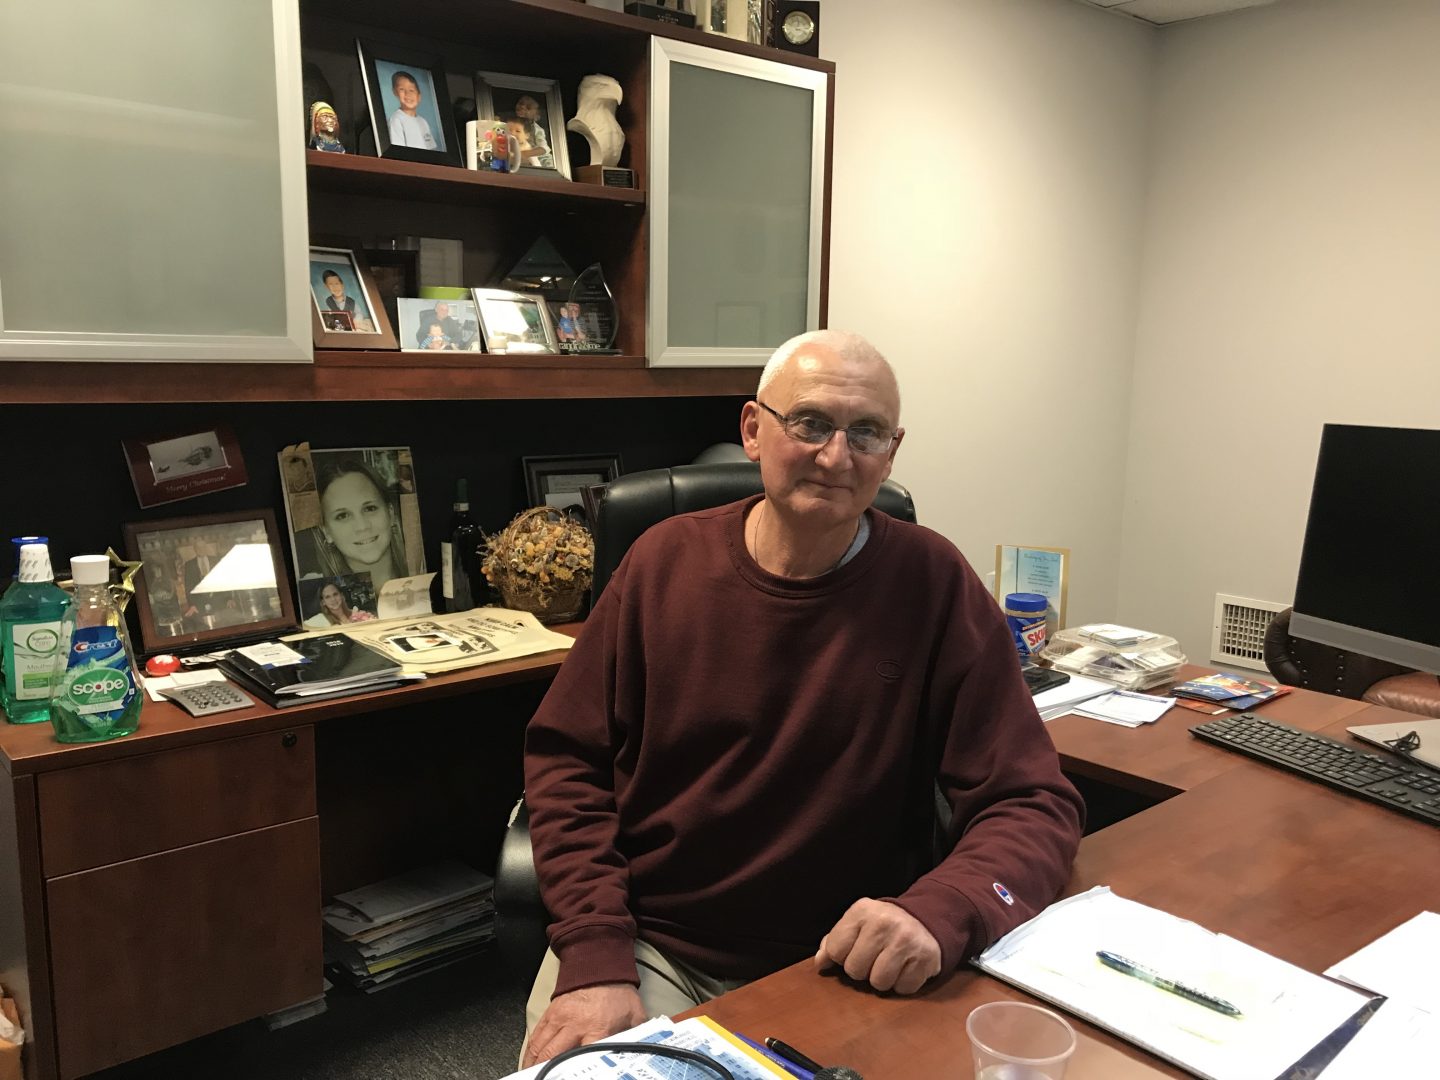 Bucks County Representative Gene DiGirolamo, at his district office desk. DiGirolamo is one of just a few Republicans who strongly supports increasing the dollars provided to counties for human services. He hasn’t had much luck convincing the rest of his caucus.